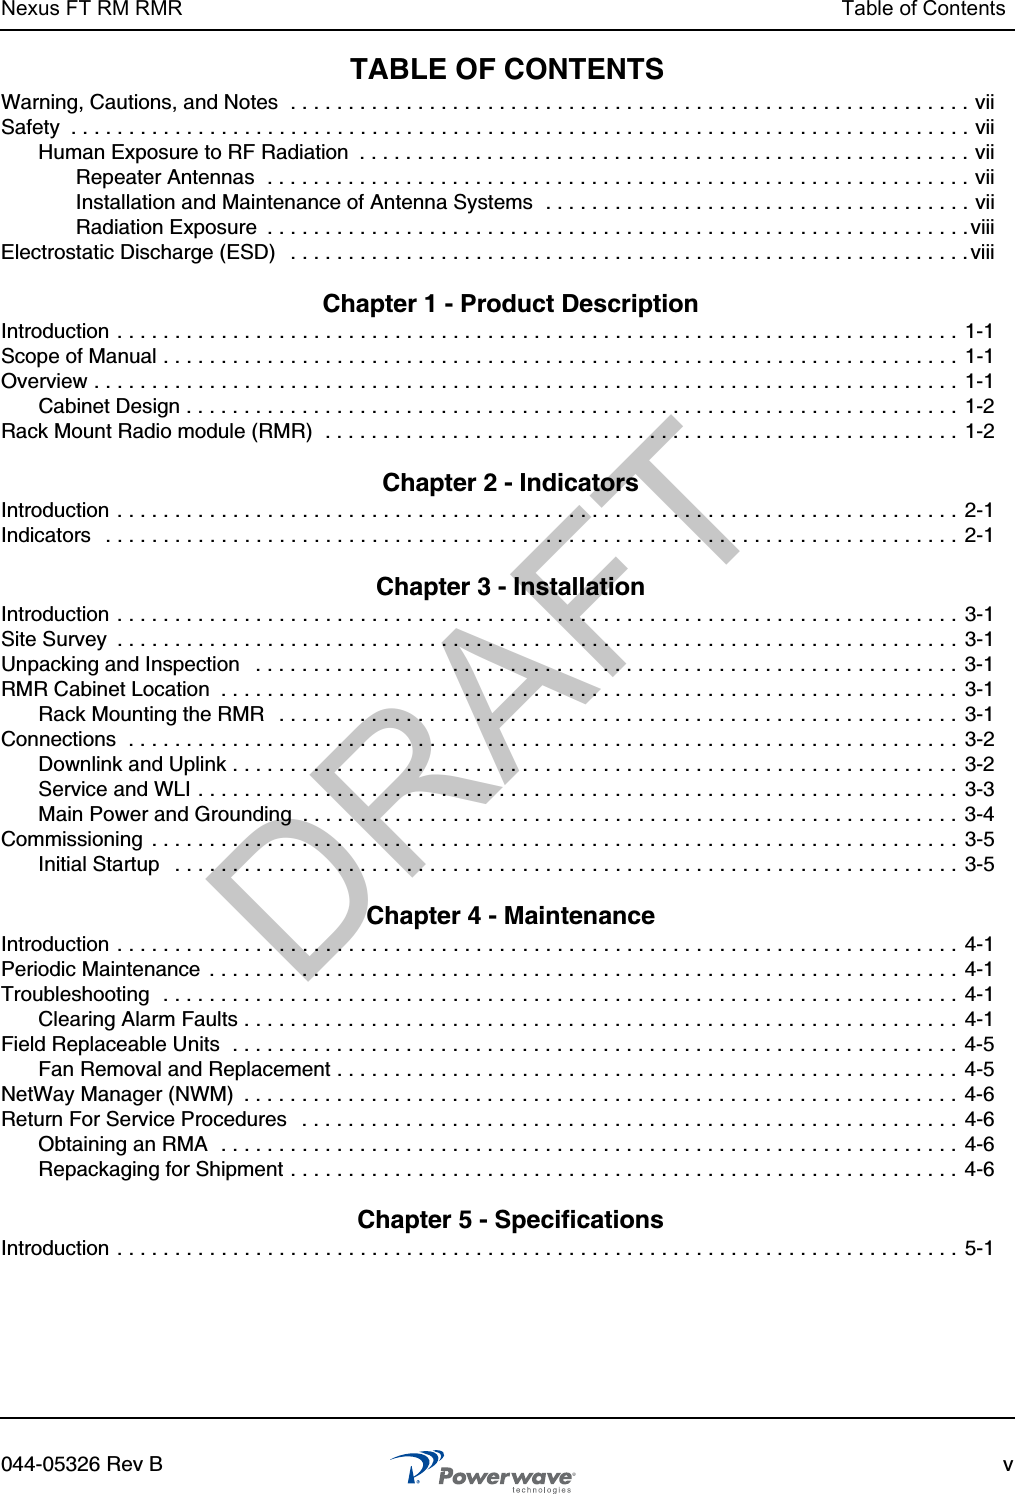 Nexus FT RM RMR Table of Contents044-05326 Rev B vTABLE OF CONTENTSWarning, Cautions, and Notes  . . . . . . . . . . . . . . . . . . . . . . . . . . . . . . . . . . . . . . . . . . . . . . . . . . . . . . . . . . . viiSafety  . . . . . . . . . . . . . . . . . . . . . . . . . . . . . . . . . . . . . . . . . . . . . . . . . . . . . . . . . . . . . . . . . . . . . . . . . . . . . . viiHuman Exposure to RF Radiation  . . . . . . . . . . . . . . . . . . . . . . . . . . . . . . . . . . . . . . . . . . . . . . . . . . . . . viiRepeater Antennas  . . . . . . . . . . . . . . . . . . . . . . . . . . . . . . . . . . . . . . . . . . . . . . . . . . . . . . . . . . . . . viiInstallation and Maintenance of Antenna Systems  . . . . . . . . . . . . . . . . . . . . . . . . . . . . . . . . . . . . . viiRadiation Exposure  . . . . . . . . . . . . . . . . . . . . . . . . . . . . . . . . . . . . . . . . . . . . . . . . . . . . . . . . . . . . .viiiElectrostatic Discharge (ESD)   . . . . . . . . . . . . . . . . . . . . . . . . . . . . . . . . . . . . . . . . . . . . . . . . . . . . . . . . . . . viii Chapter 1 - Product Description Introduction . . . . . . . . . . . . . . . . . . . . . . . . . . . . . . . . . . . . . . . . . . . . . . . . . . . . . . . . . . . . . . . . . . . . . . . . . 1-1Scope of Manual . . . . . . . . . . . . . . . . . . . . . . . . . . . . . . . . . . . . . . . . . . . . . . . . . . . . . . . . . . . . . . . . . . . . . 1-1Overview . . . . . . . . . . . . . . . . . . . . . . . . . . . . . . . . . . . . . . . . . . . . . . . . . . . . . . . . . . . . . . . . . . . . . . . . . . .  1-1Cabinet Design . . . . . . . . . . . . . . . . . . . . . . . . . . . . . . . . . . . . . . . . . . . . . . . . . . . . . . . . . . . . . . . . . . .  1-2Rack Mount Radio module (RMR)  . . . . . . . . . . . . . . . . . . . . . . . . . . . . . . . . . . . . . . . . . . . . . . . . . . . . . . .  1-2 Chapter 2 - Indicators Introduction . . . . . . . . . . . . . . . . . . . . . . . . . . . . . . . . . . . . . . . . . . . . . . . . . . . . . . . . . . . . . . . . . . . . . . . . . 2-1Indicators   . . . . . . . . . . . . . . . . . . . . . . . . . . . . . . . . . . . . . . . . . . . . . . . . . . . . . . . . . . . . . . . . . . . . . . . . . . 2-1 Chapter 3 - Installation Introduction . . . . . . . . . . . . . . . . . . . . . . . . . . . . . . . . . . . . . . . . . . . . . . . . . . . . . . . . . . . . . . . . . . . . . . . . . 3-1Site Survey  . . . . . . . . . . . . . . . . . . . . . . . . . . . . . . . . . . . . . . . . . . . . . . . . . . . . . . . . . . . . . . . . . . . . . . . . . 3-1Unpacking and Inspection   . . . . . . . . . . . . . . . . . . . . . . . . . . . . . . . . . . . . . . . . . . . . . . . . . . . . . . . . . . . . . 3-1RMR Cabinet Location  . . . . . . . . . . . . . . . . . . . . . . . . . . . . . . . . . . . . . . . . . . . . . . . . . . . . . . . . . . . . . . . .  3-1Rack Mounting the RMR   . . . . . . . . . . . . . . . . . . . . . . . . . . . . . . . . . . . . . . . . . . . . . . . . . . . . . . . . . . . 3-1Connections  . . . . . . . . . . . . . . . . . . . . . . . . . . . . . . . . . . . . . . . . . . . . . . . . . . . . . . . . . . . . . . . . . . . . . . . . 3-2Downlink and Uplink . . . . . . . . . . . . . . . . . . . . . . . . . . . . . . . . . . . . . . . . . . . . . . . . . . . . . . . . . . . . . . . 3-2Service and WLI . . . . . . . . . . . . . . . . . . . . . . . . . . . . . . . . . . . . . . . . . . . . . . . . . . . . . . . . . . . . . . . . . .  3-3Main Power and Grounding  . . . . . . . . . . . . . . . . . . . . . . . . . . . . . . . . . . . . . . . . . . . . . . . . . . . . . . . . .  3-4Commissioning  . . . . . . . . . . . . . . . . . . . . . . . . . . . . . . . . . . . . . . . . . . . . . . . . . . . . . . . . . . . . . . . . . . . . . .  3-5Initial Startup   . . . . . . . . . . . . . . . . . . . . . . . . . . . . . . . . . . . . . . . . . . . . . . . . . . . . . . . . . . . . . . . . . . . . 3-5 Chapter 4 - Maintenance Introduction . . . . . . . . . . . . . . . . . . . . . . . . . . . . . . . . . . . . . . . . . . . . . . . . . . . . . . . . . . . . . . . . . . . . . . . . . 4-1Periodic Maintenance  . . . . . . . . . . . . . . . . . . . . . . . . . . . . . . . . . . . . . . . . . . . . . . . . . . . . . . . . . . . . . . . . .  4-1Troubleshooting  . . . . . . . . . . . . . . . . . . . . . . . . . . . . . . . . . . . . . . . . . . . . . . . . . . . . . . . . . . . . . . . . . . . . .  4-1Clearing Alarm Faults . . . . . . . . . . . . . . . . . . . . . . . . . . . . . . . . . . . . . . . . . . . . . . . . . . . . . . . . . . . . . . 4-1Field Replaceable Units  . . . . . . . . . . . . . . . . . . . . . . . . . . . . . . . . . . . . . . . . . . . . . . . . . . . . . . . . . . . . . . . 4-5Fan Removal and Replacement . . . . . . . . . . . . . . . . . . . . . . . . . . . . . . . . . . . . . . . . . . . . . . . . . . . . . .  4-5NetWay Manager (NWM)  . . . . . . . . . . . . . . . . . . . . . . . . . . . . . . . . . . . . . . . . . . . . . . . . . . . . . . . . . . . . . . 4-6Return For Service Procedures   . . . . . . . . . . . . . . . . . . . . . . . . . . . . . . . . . . . . . . . . . . . . . . . . . . . . . . . . .  4-6Obtaining an RMA  . . . . . . . . . . . . . . . . . . . . . . . . . . . . . . . . . . . . . . . . . . . . . . . . . . . . . . . . . . . . . . . .  4-6Repackaging for Shipment . . . . . . . . . . . . . . . . . . . . . . . . . . . . . . . . . . . . . . . . . . . . . . . . . . . . . . . . . . 4-6 Chapter 5 - Specifications Introduction . . . . . . . . . . . . . . . . . . . . . . . . . . . . . . . . . . . . . . . . . . . . . . . . . . . . . . . . . . . . . . . . . . . . . . . . . 5-1DRAFT